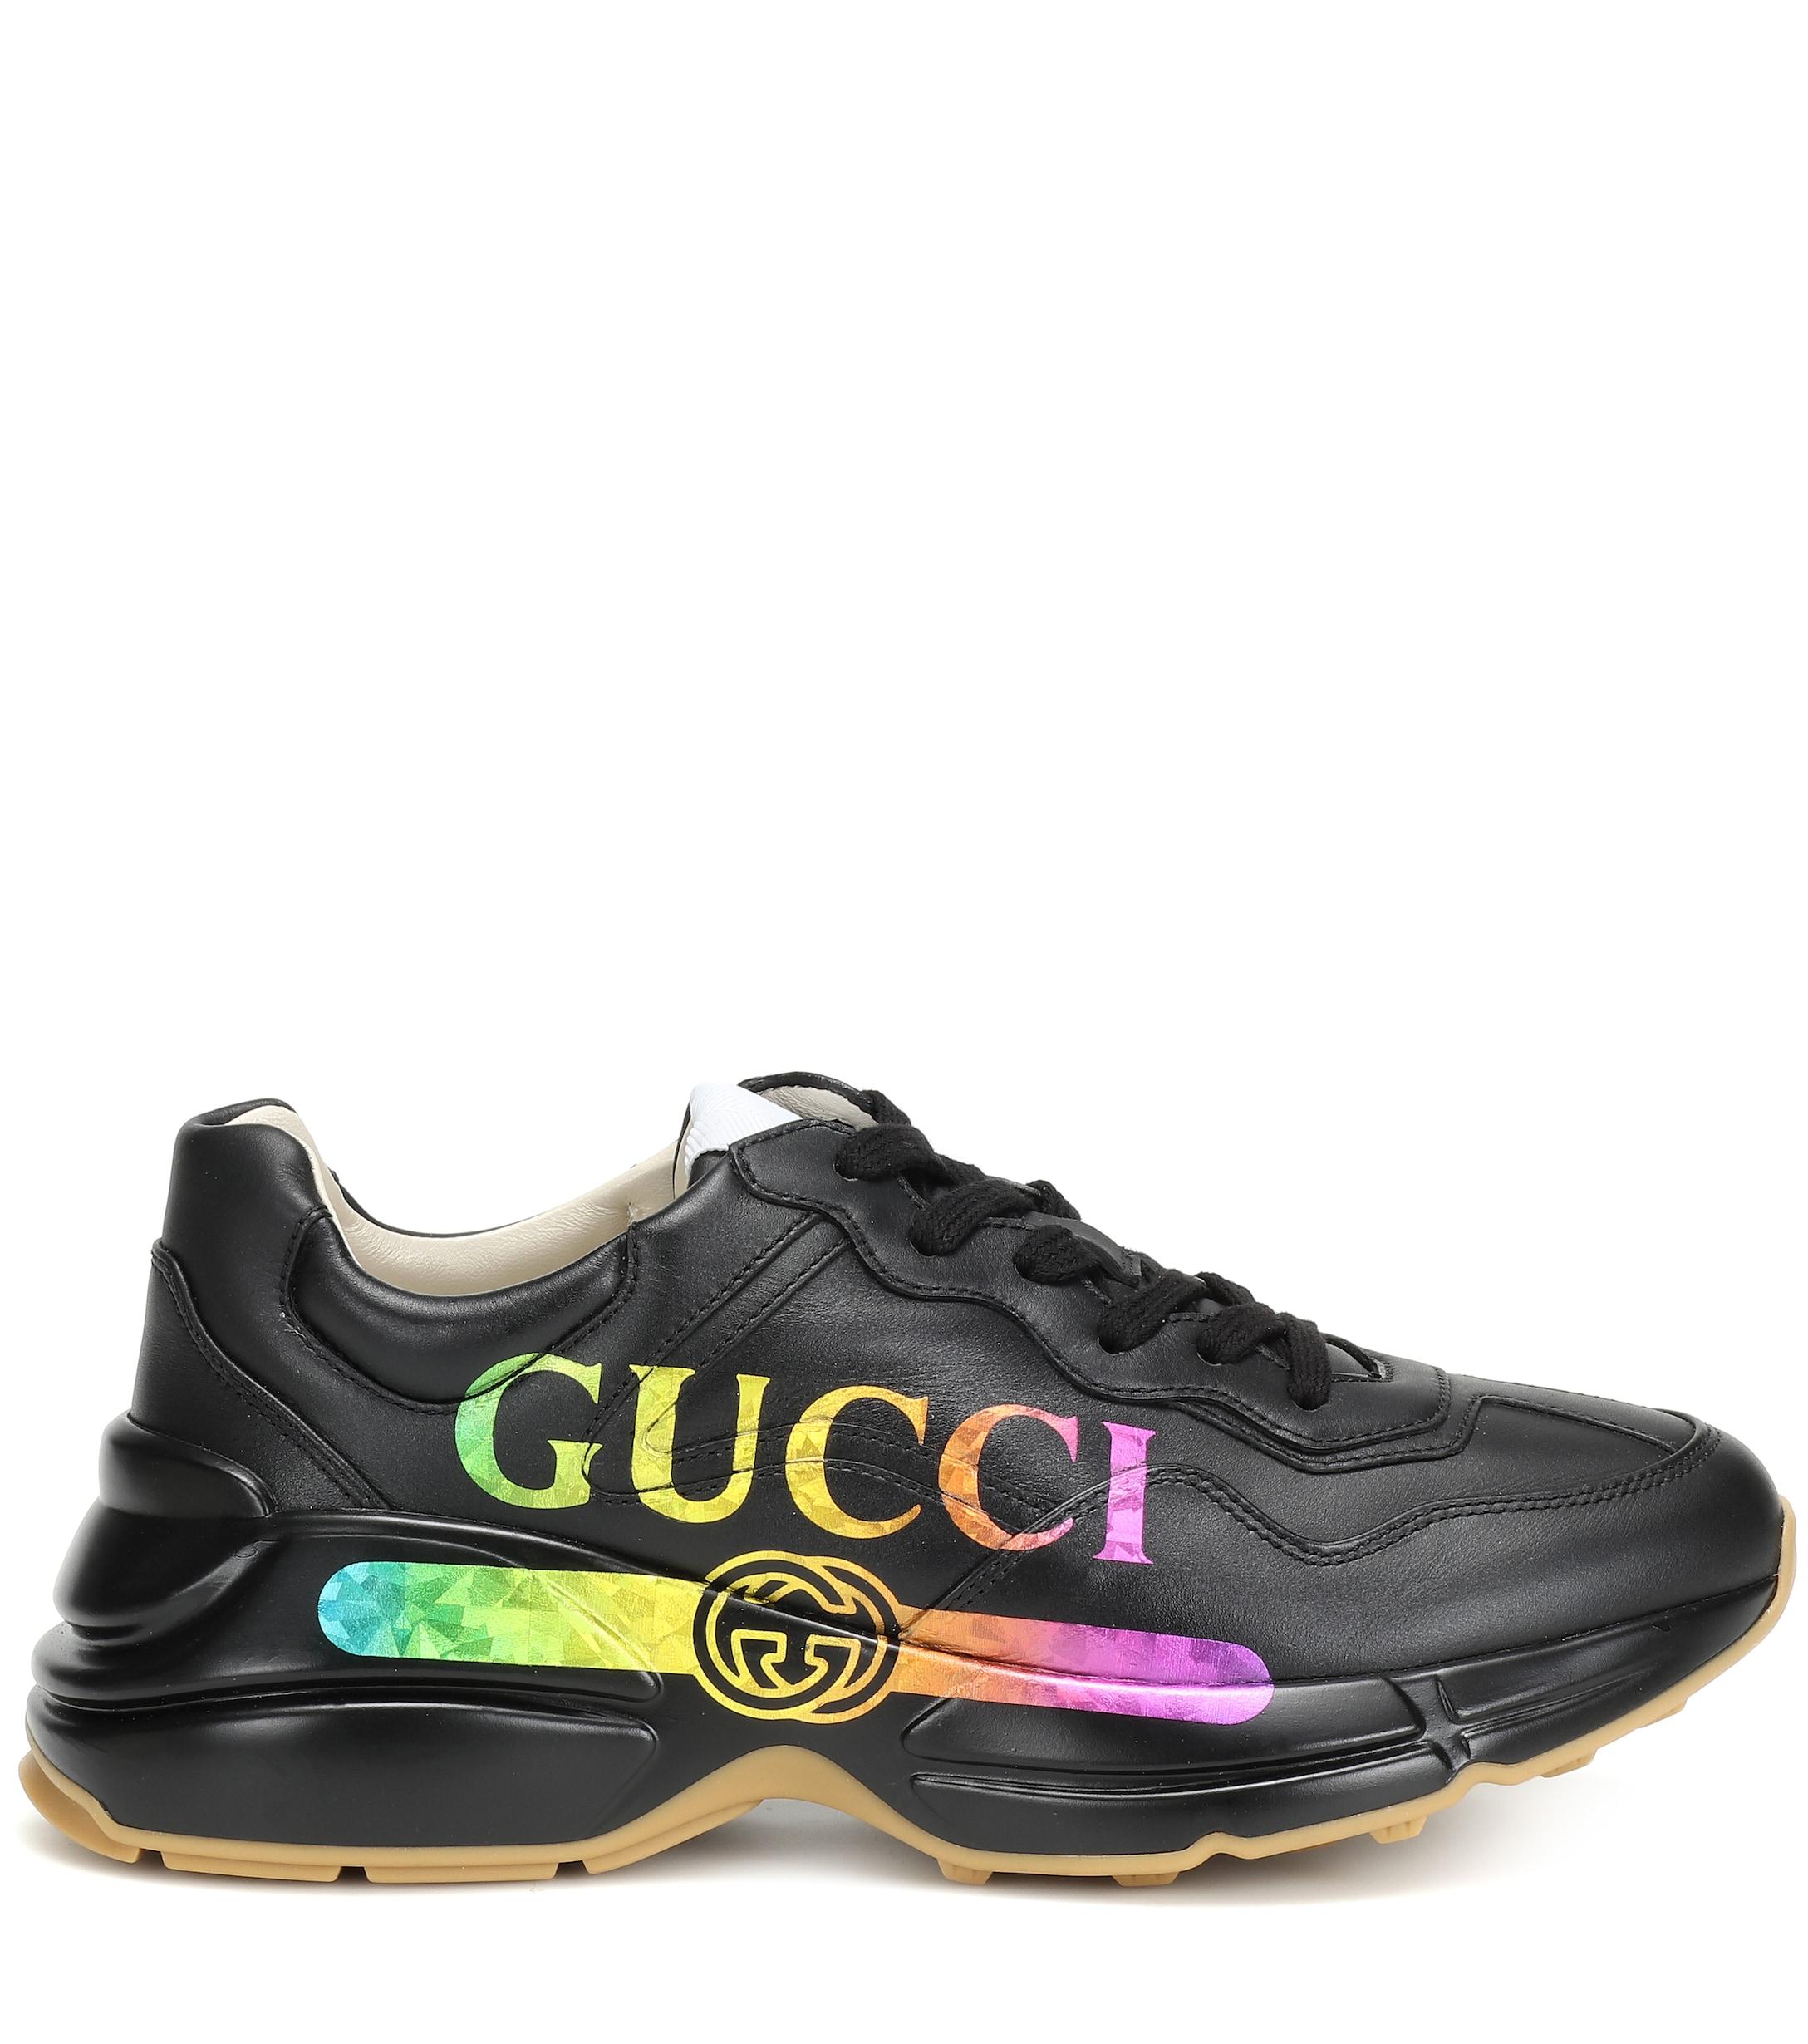 gucci rhyton sneakers price